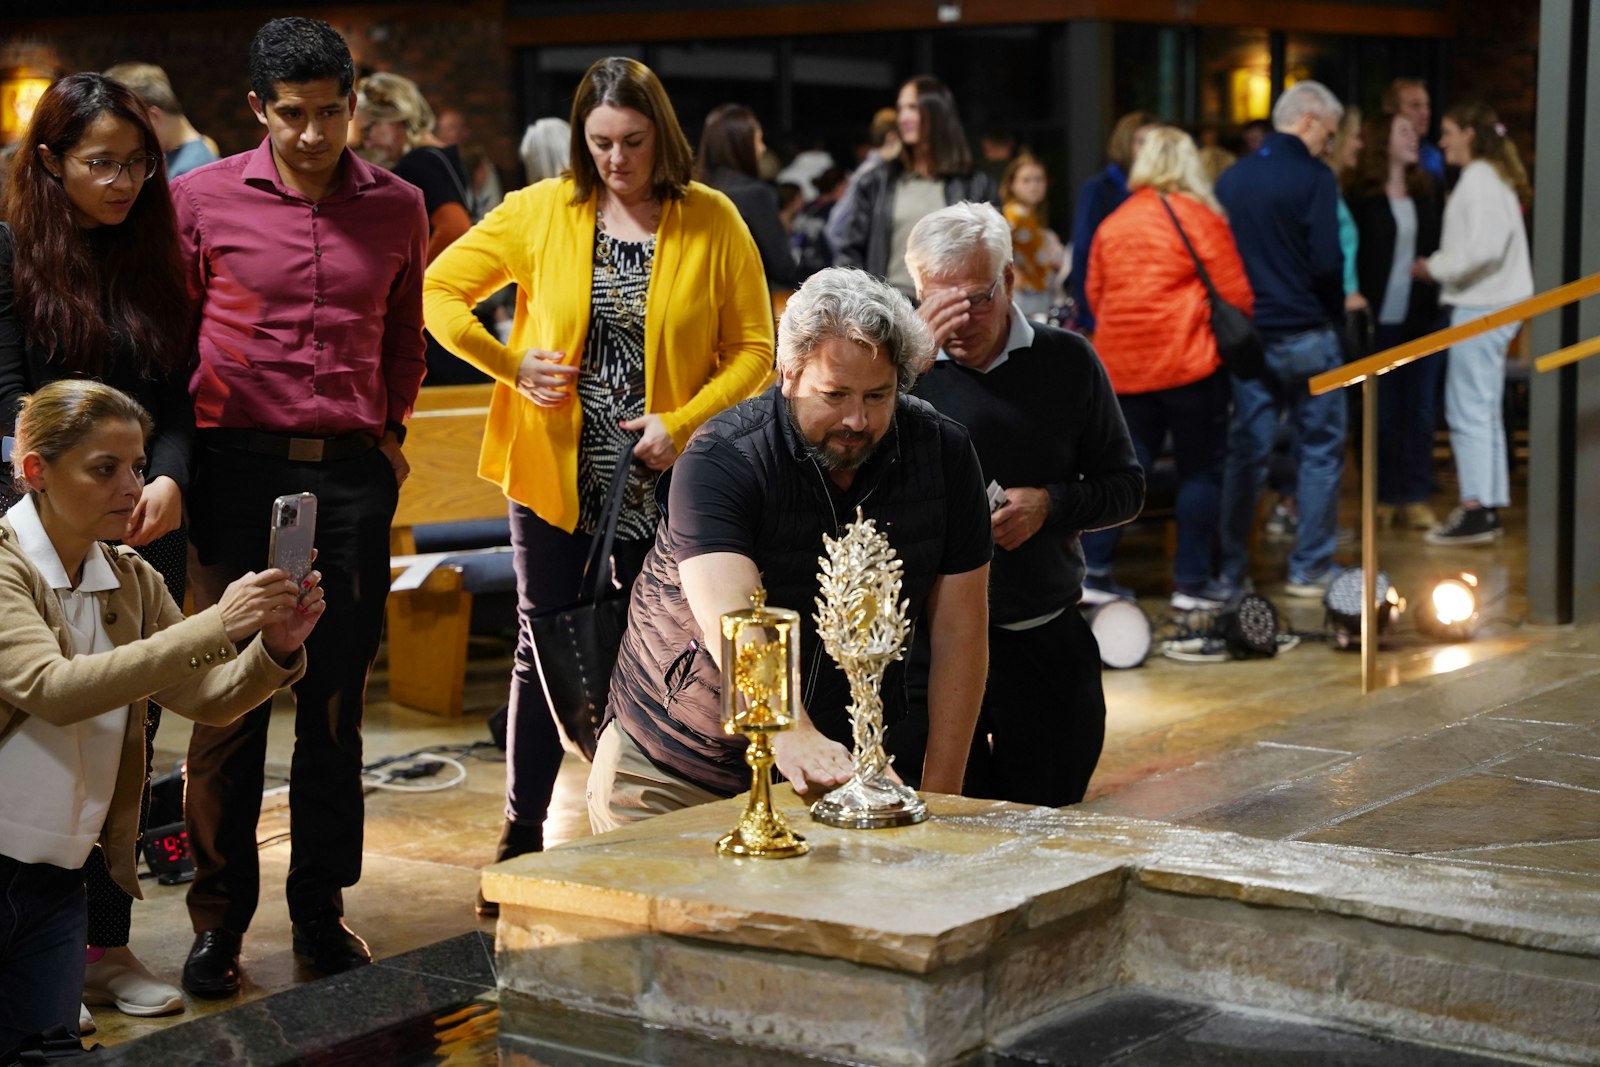 People venerate a relic of St. John Paul II after Christopher West's talk. An estimated 500 people were at St. Joseph Parish in Lake Orion for West's John Paul II-themed talk "Made for More."